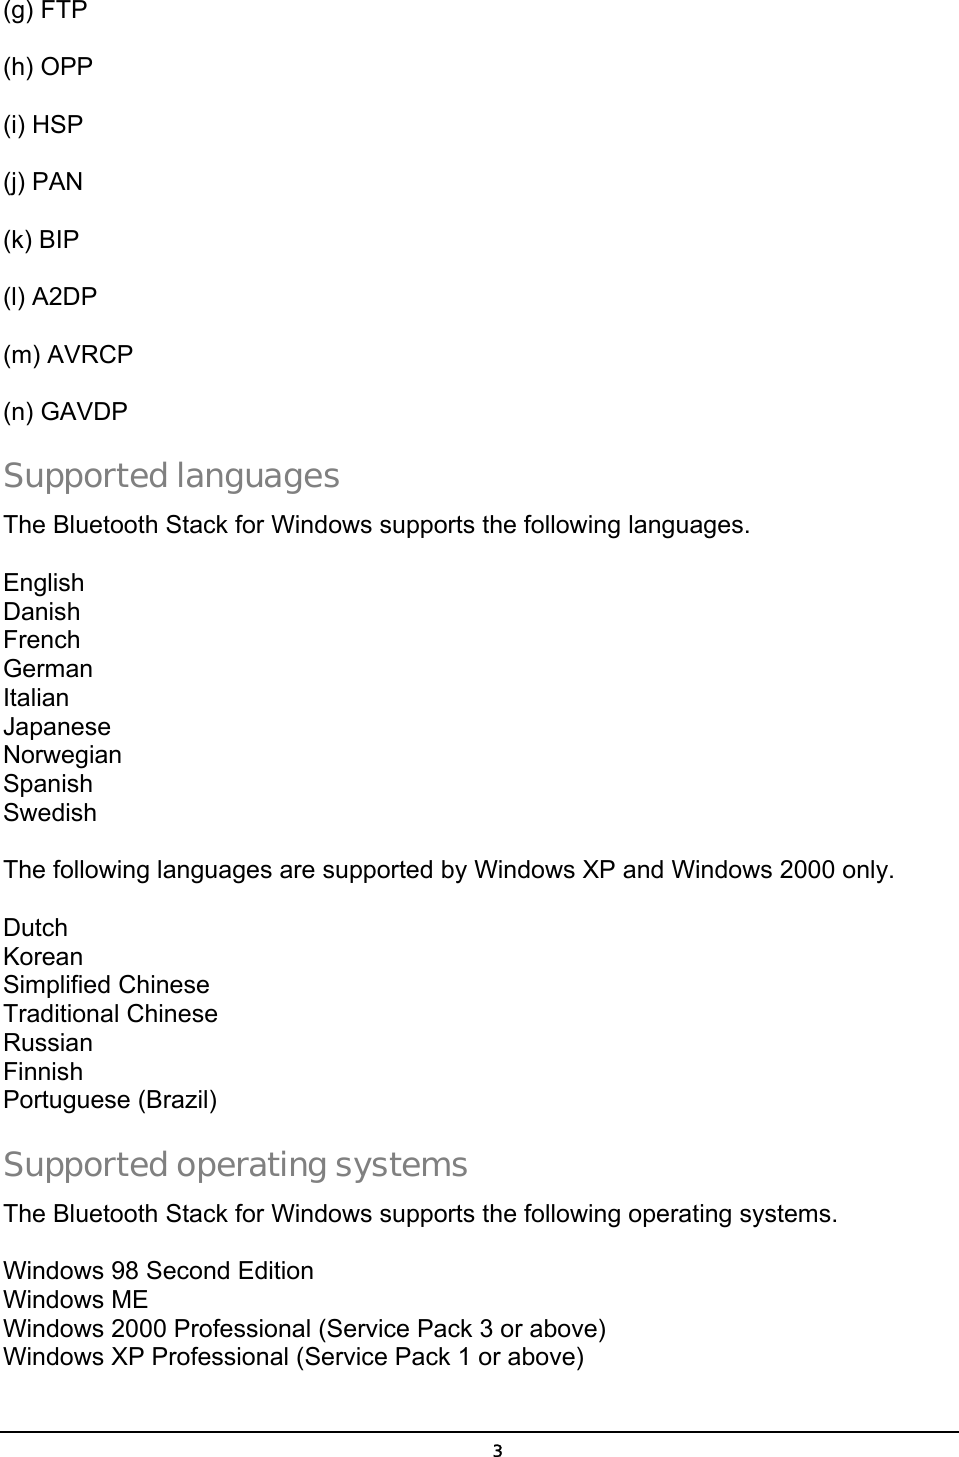  (g) FTP  (h) OPP  (i) HSP  (j) PAN    (k) BIP    (l) A2DP  (m) AVRCP    (n) GAVDP   Supported languages The Bluetooth Stack for Windows supports the following languages.  English Danish French German Italian Japanese Norwegian Spanish Swedish  The following languages are supported by Windows XP and Windows 2000 only.  Dutch Korean Simplified Chinese Traditional Chinese Russian Finnish Portuguese (Brazil) Supported operating systems The Bluetooth Stack for Windows supports the following operating systems.  Windows 98 Second Edition Windows ME Windows 2000 Professional (Service Pack 3 or above) Windows XP Professional (Service Pack 1 or above)  3